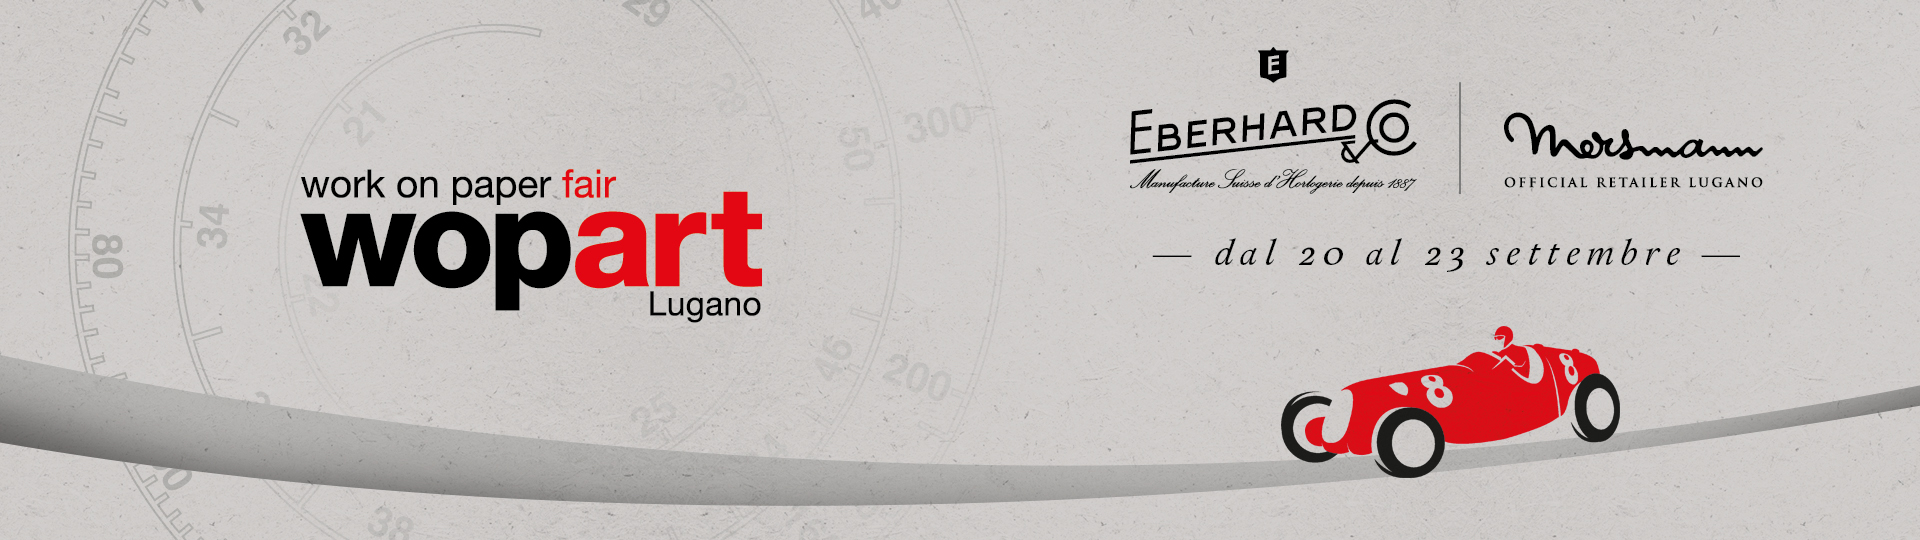 EBERHARD & CO. SUPPORTS WOPART — WORKS ON PAPER ART FAIR